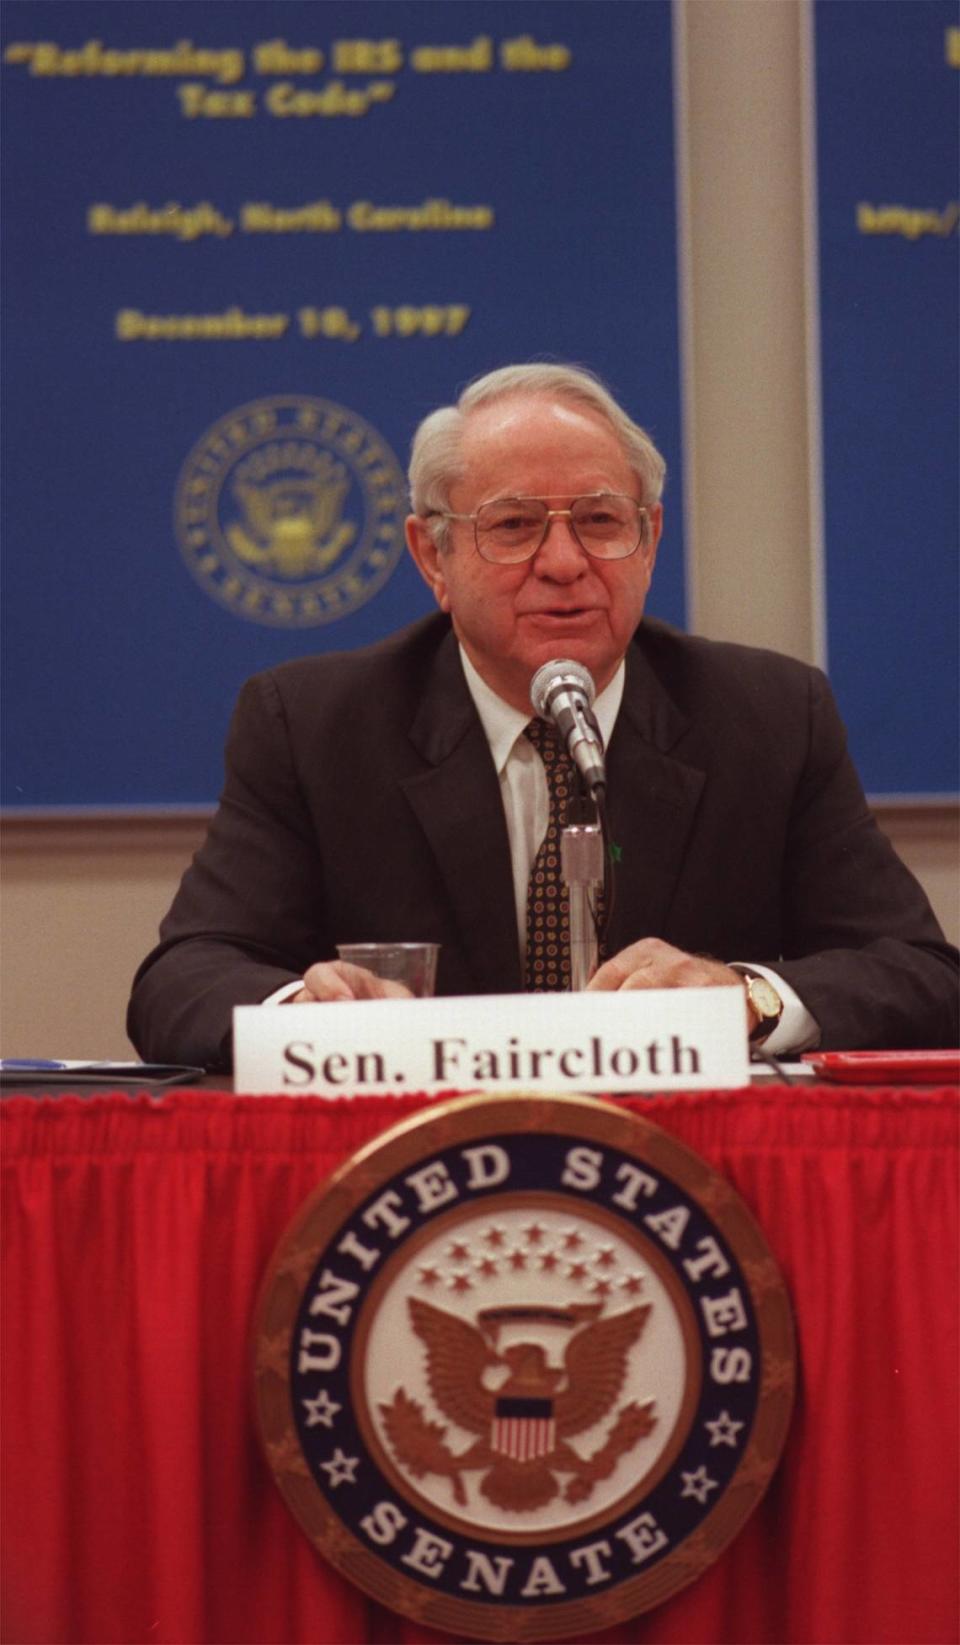 U.S. Sen. Lauch Faircloth presides over a hearing on the IRS at McKimmon Center on Dec. 10, 1997. The North Carolina senator died at the age of 95.